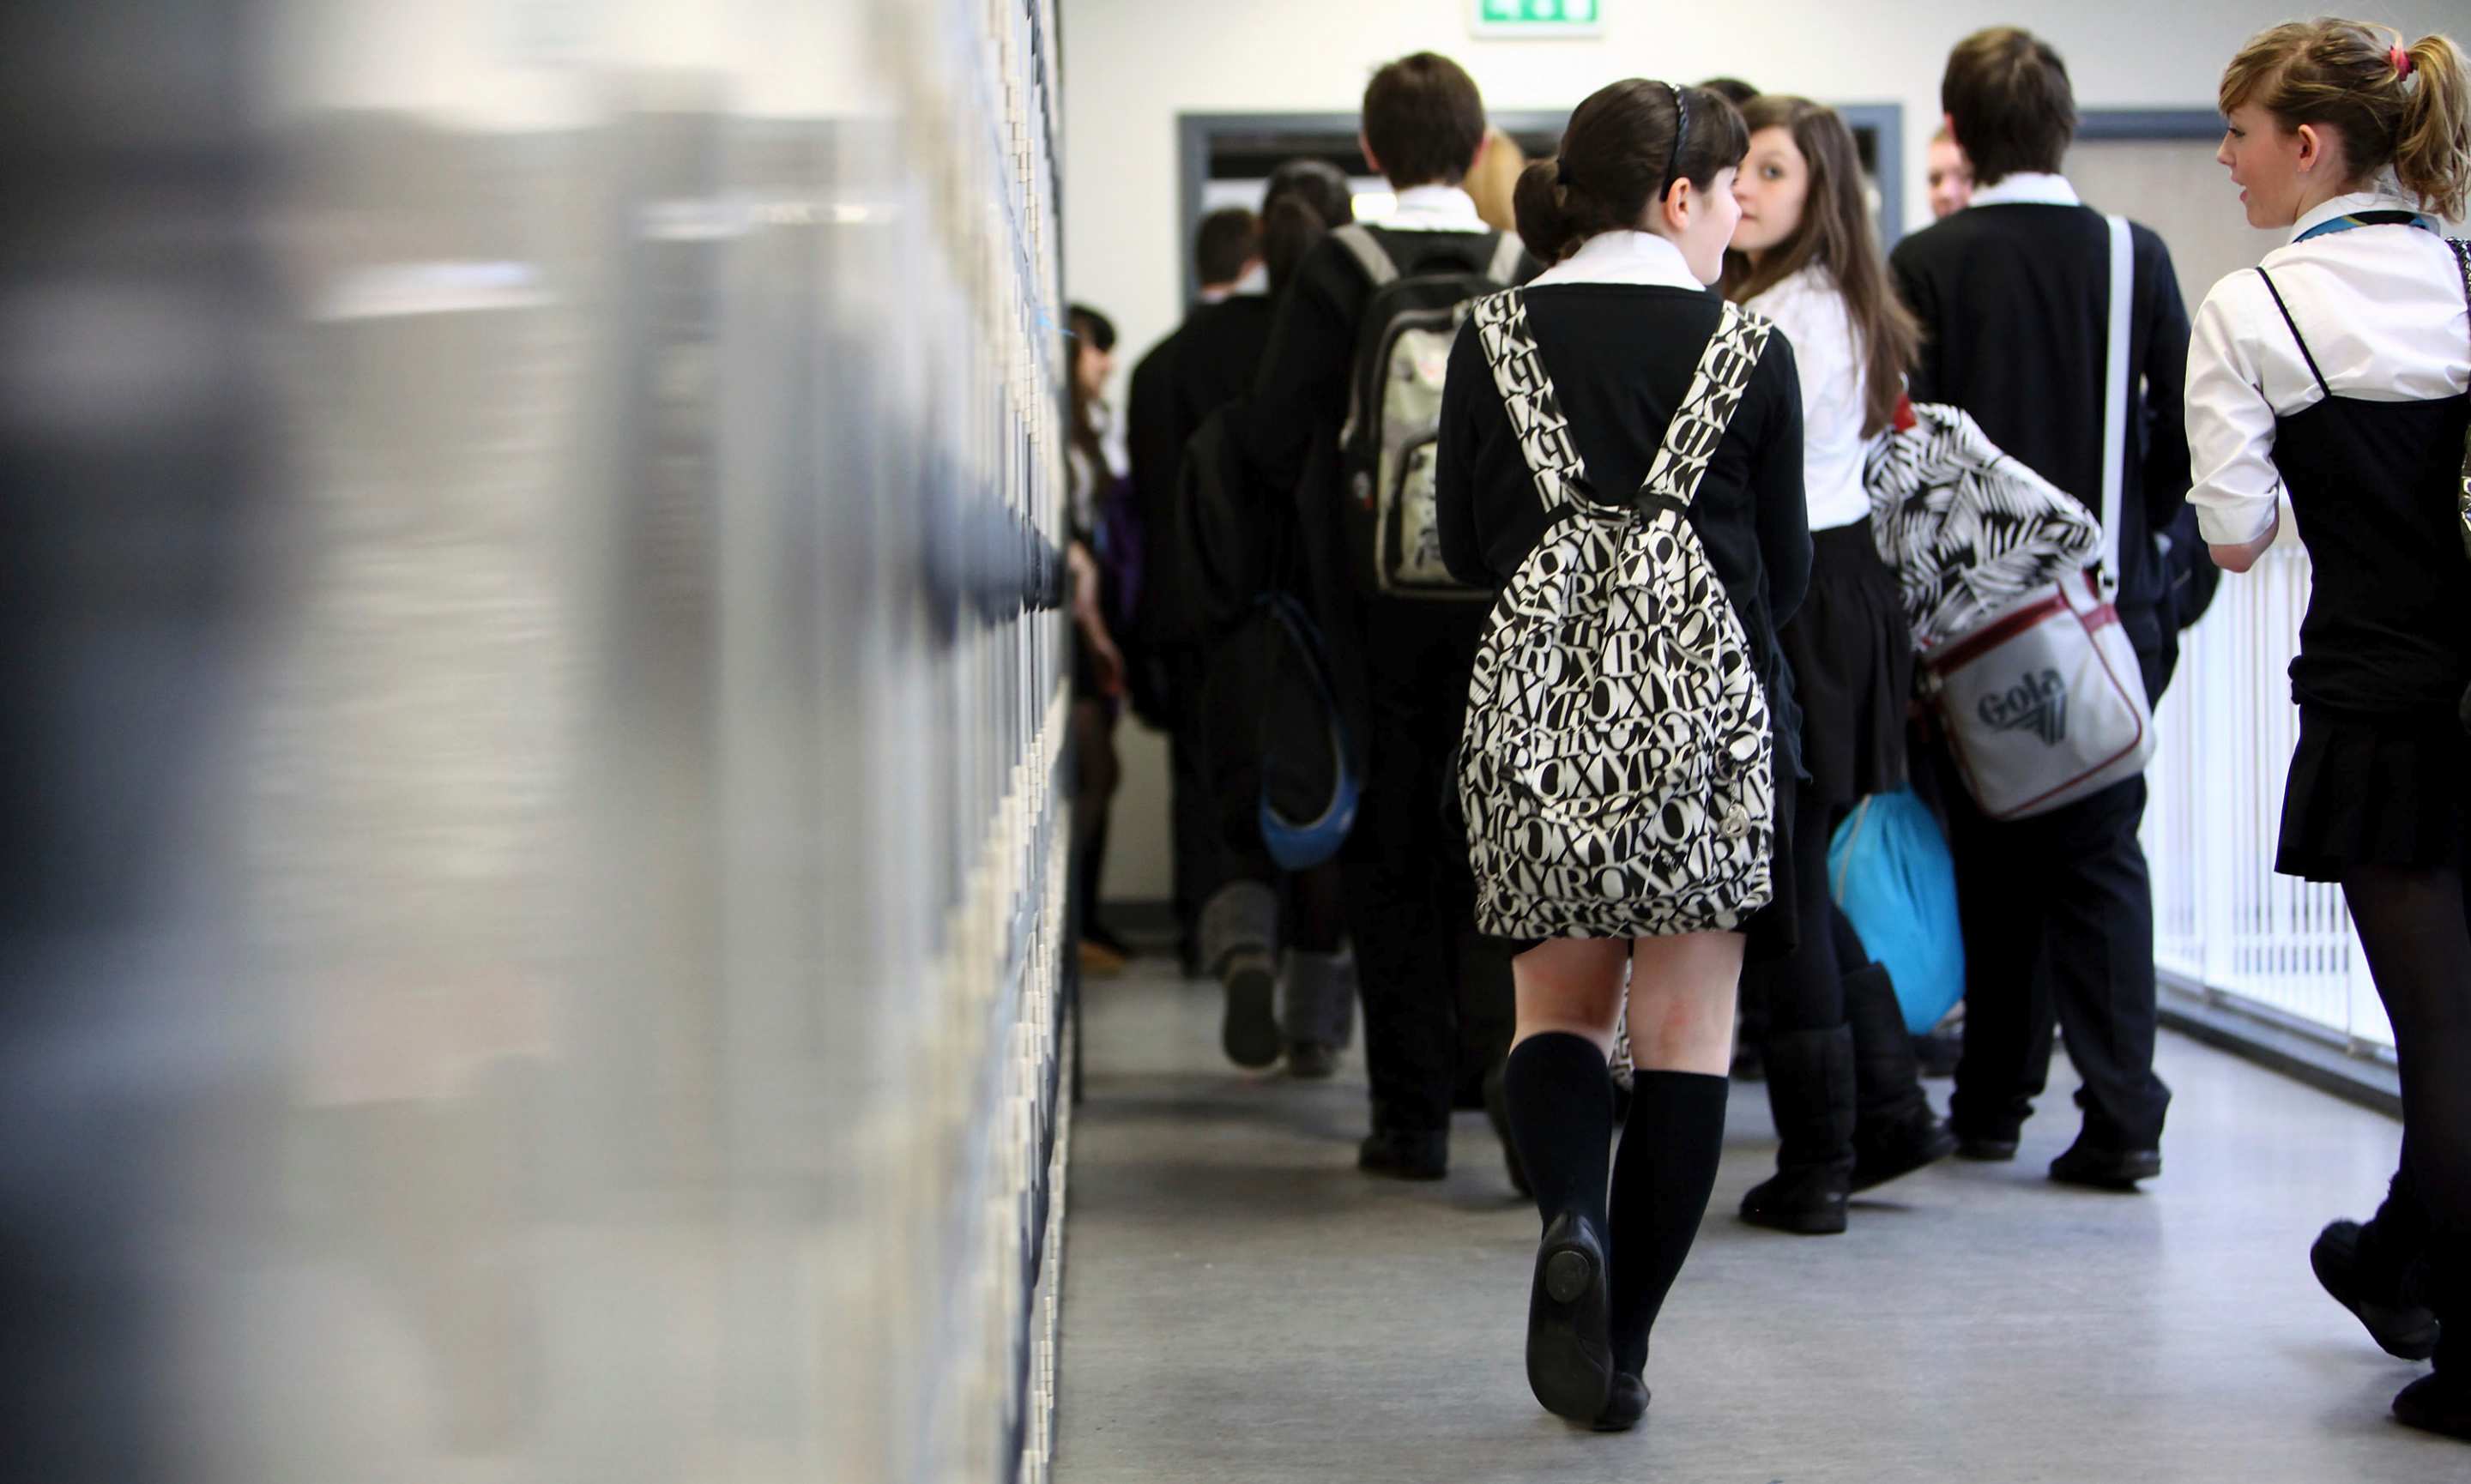 High school students make their way to a classroom. Image: iStock